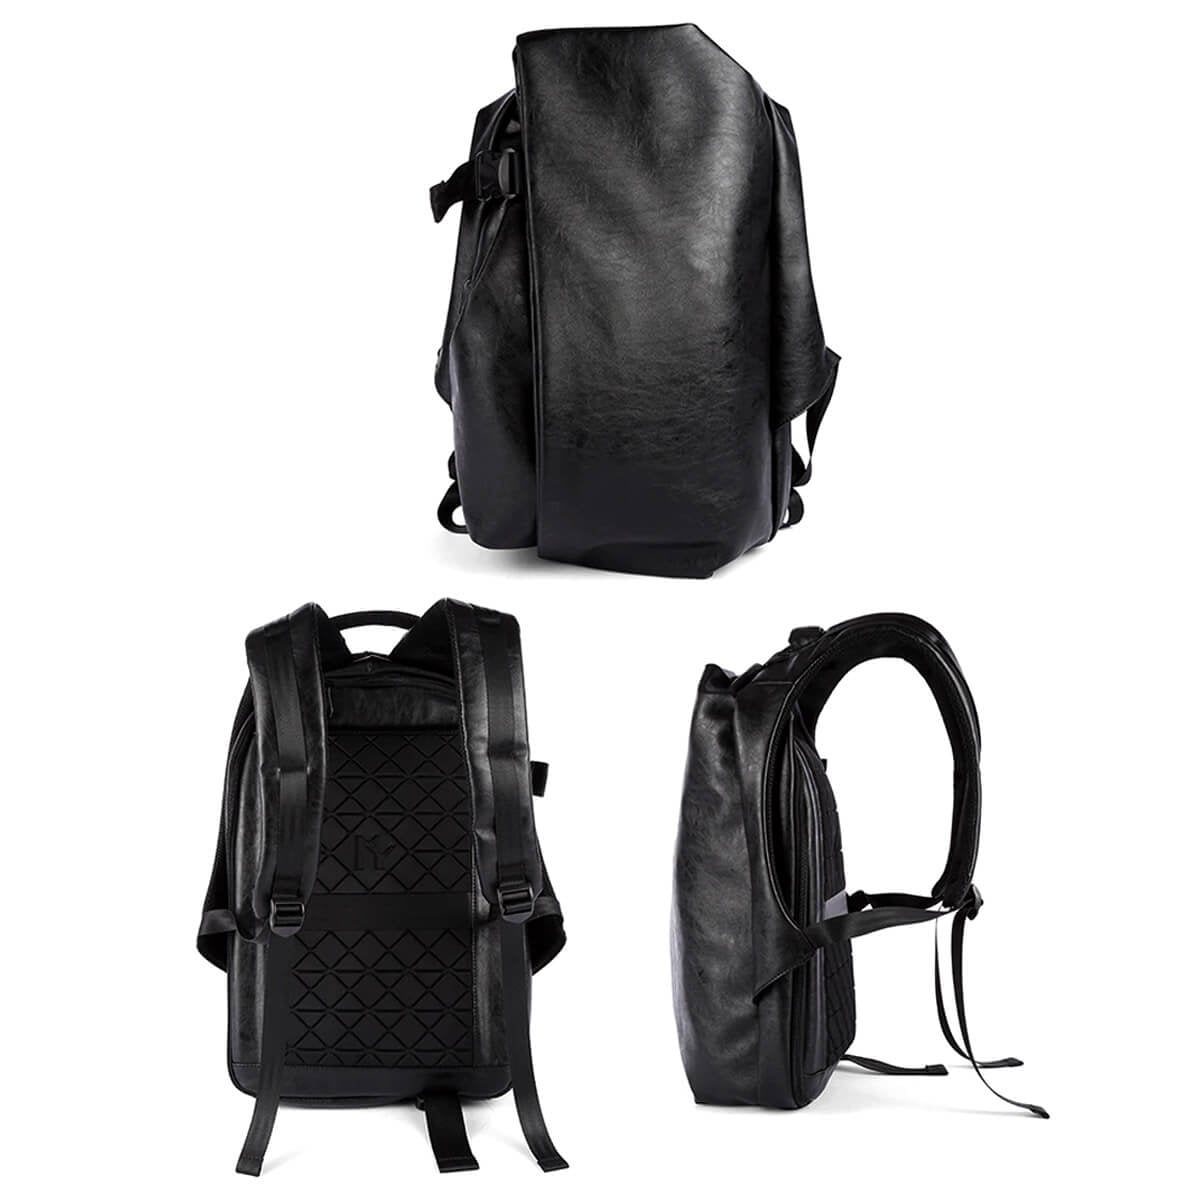 Fashion Style High-Quality USB Charge Travel Laptop Waterproof Backpack